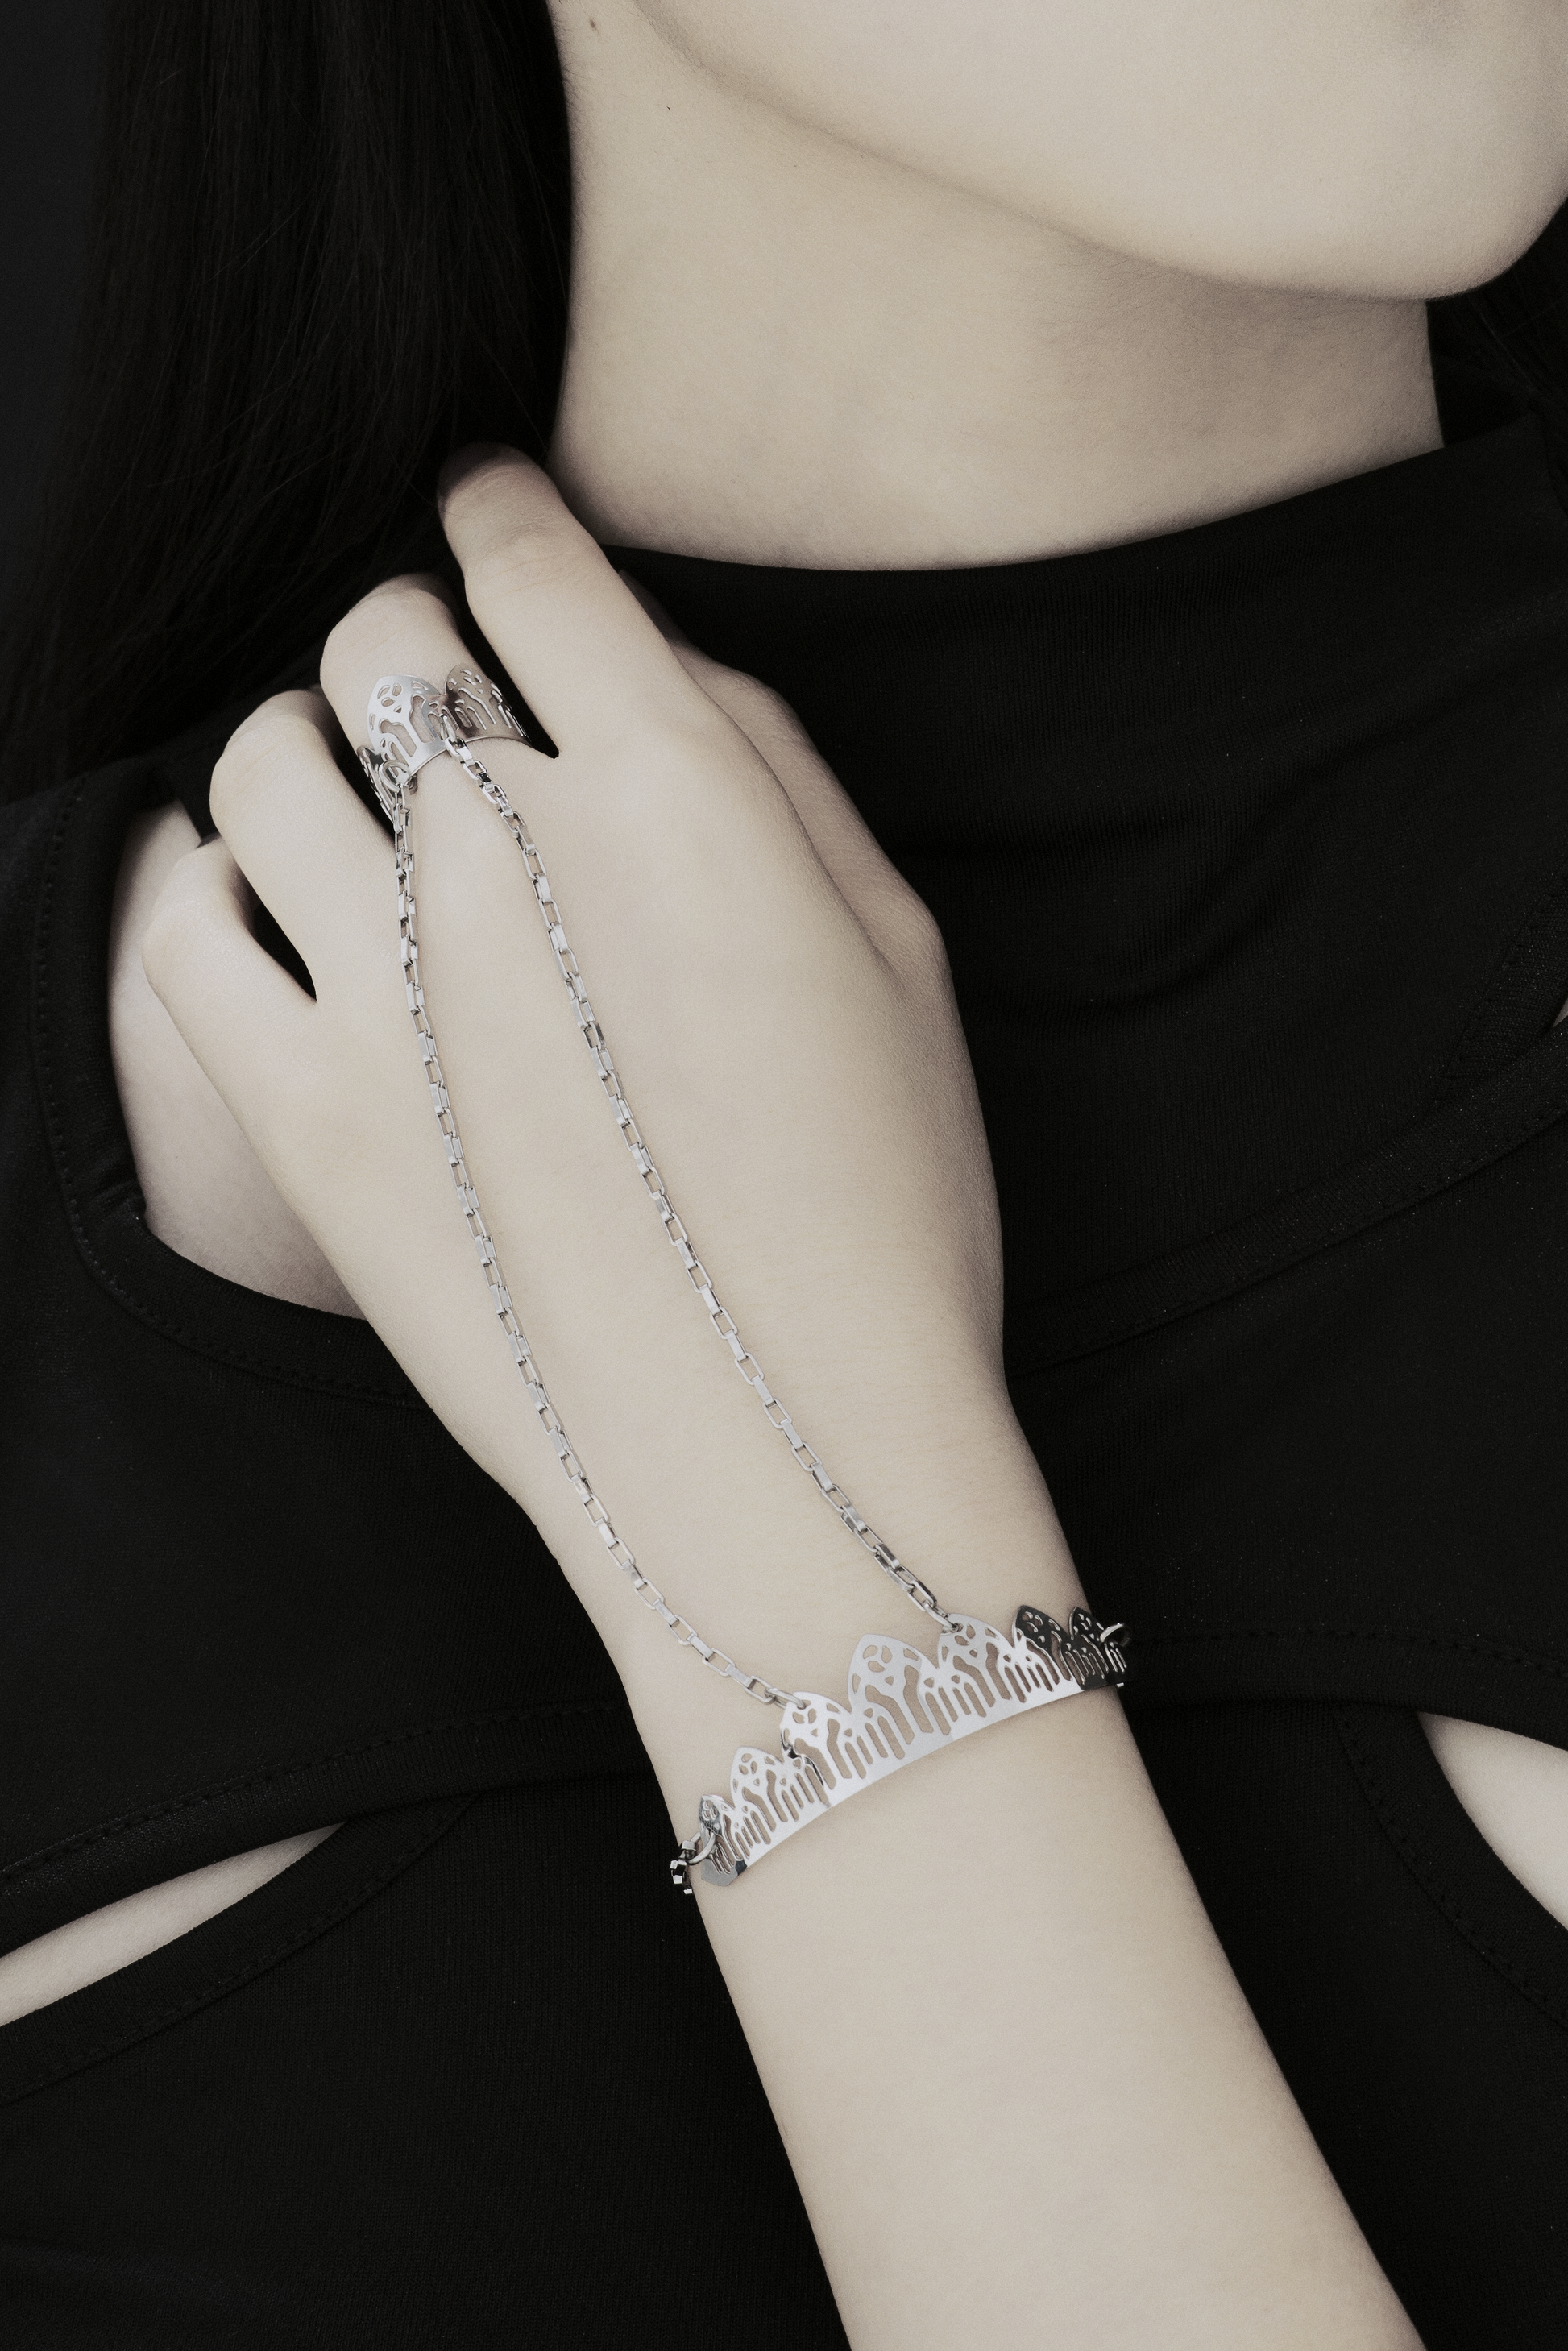 This Myril Jewels hand chain bracelet ring exudes gothic elegance, featuring a design inspired by the pointed arches of Gothic architecture. The bracelet encircles the wrist with a delicate yet bold chain, leading to a detailed ring that crowns the finger with a silhouette of arches, embodying the Neo-Gothic aesthetic. Crafted for the dark-avantgarde enthusiast, it's a versatile piece that complements both everyday minimal goth looks and elaborate festival or rave party outfits.